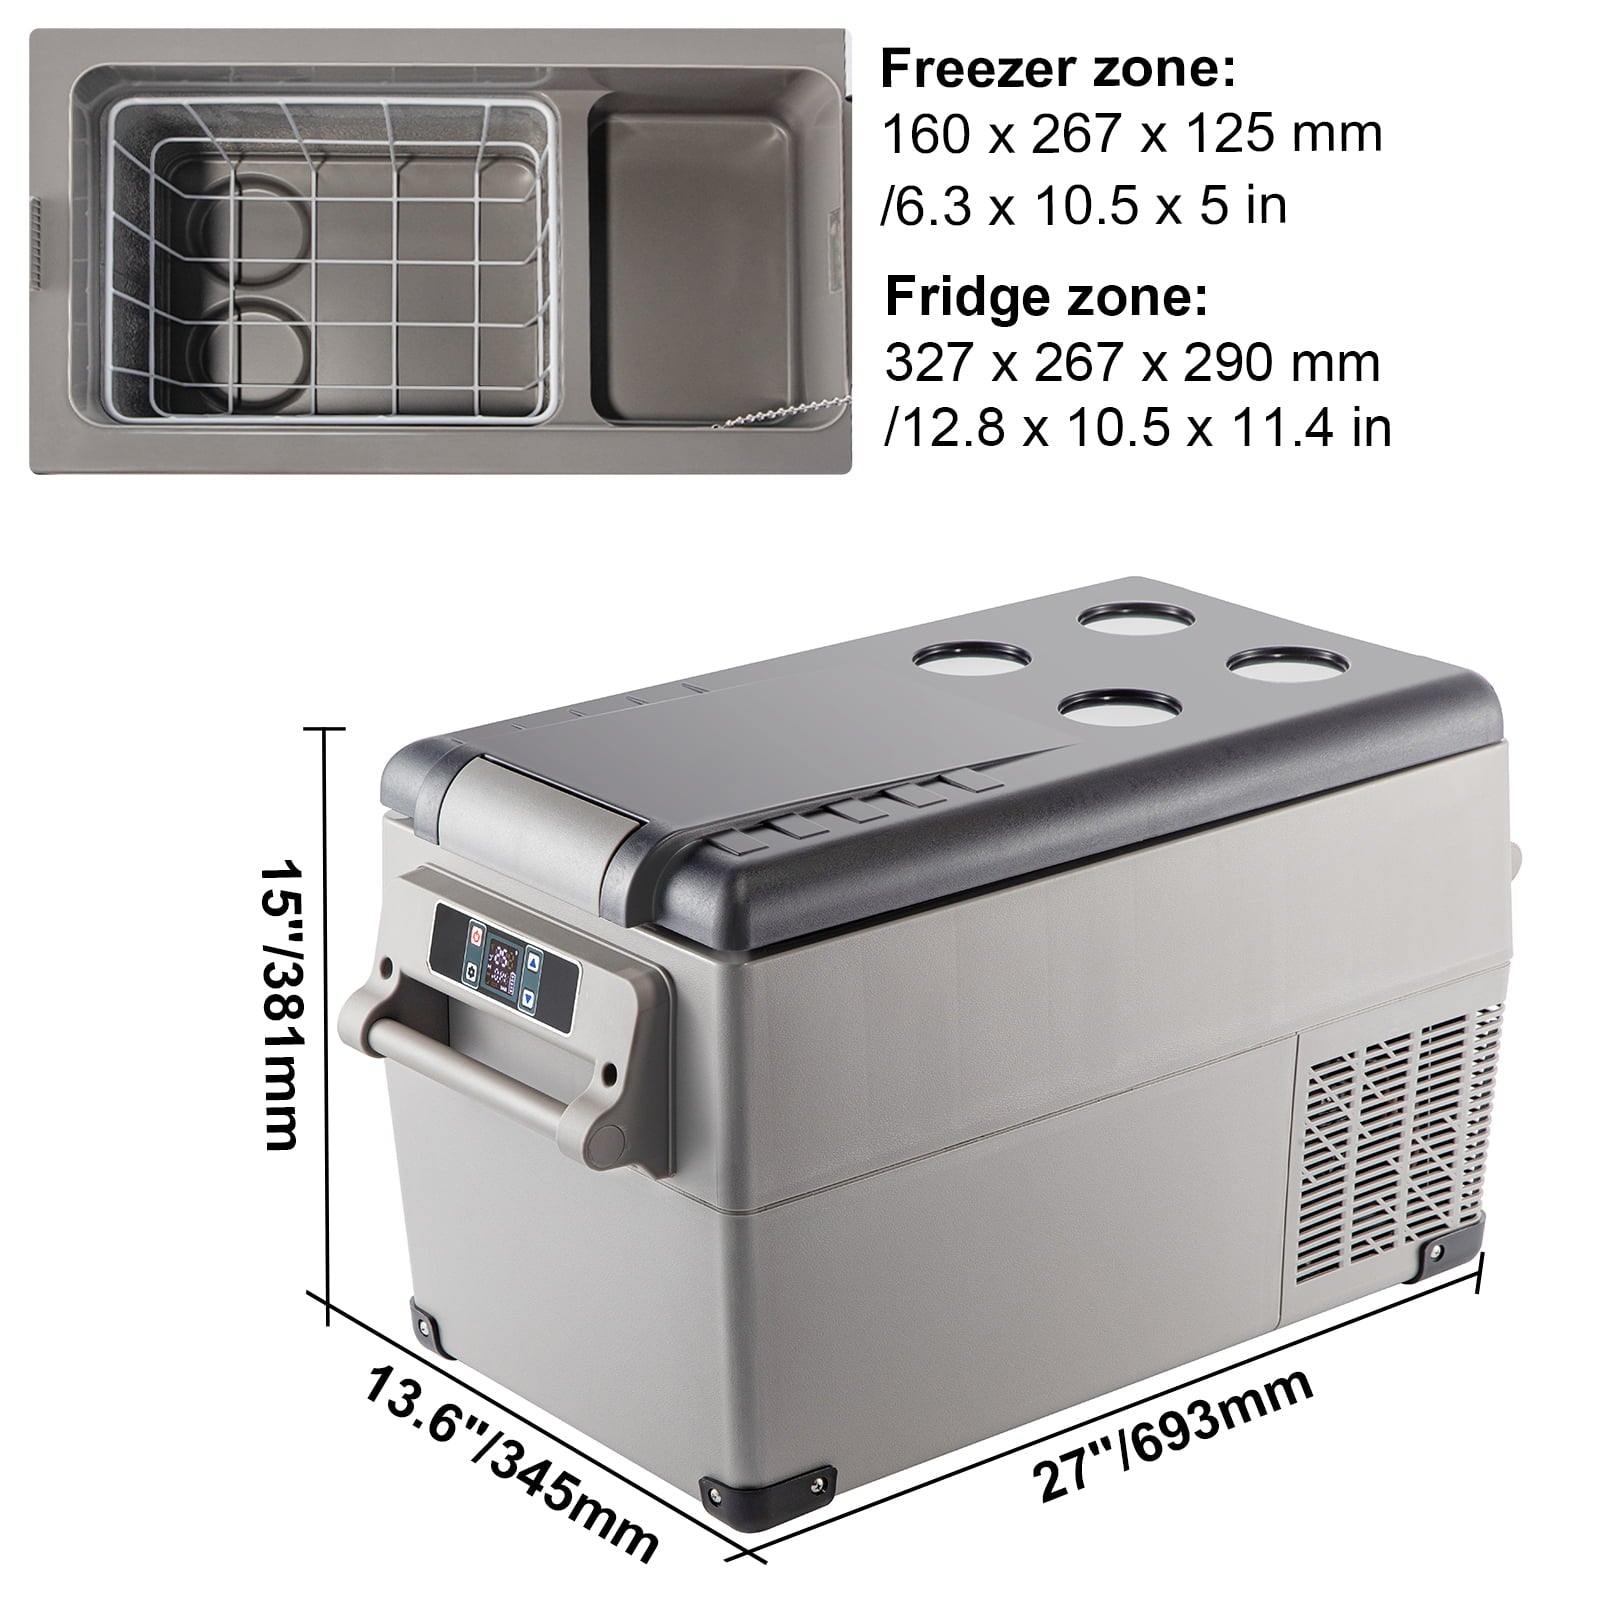 VEVOR 35L Portable Car Refrigerator 37 Quart Compact RV Fridge 12/24V DC & 110-240V AC Vehicle Car Truck Boat Mini Electric Freezer for Driving Travel Fishing Outdoor and Home Use -4°F-50°F